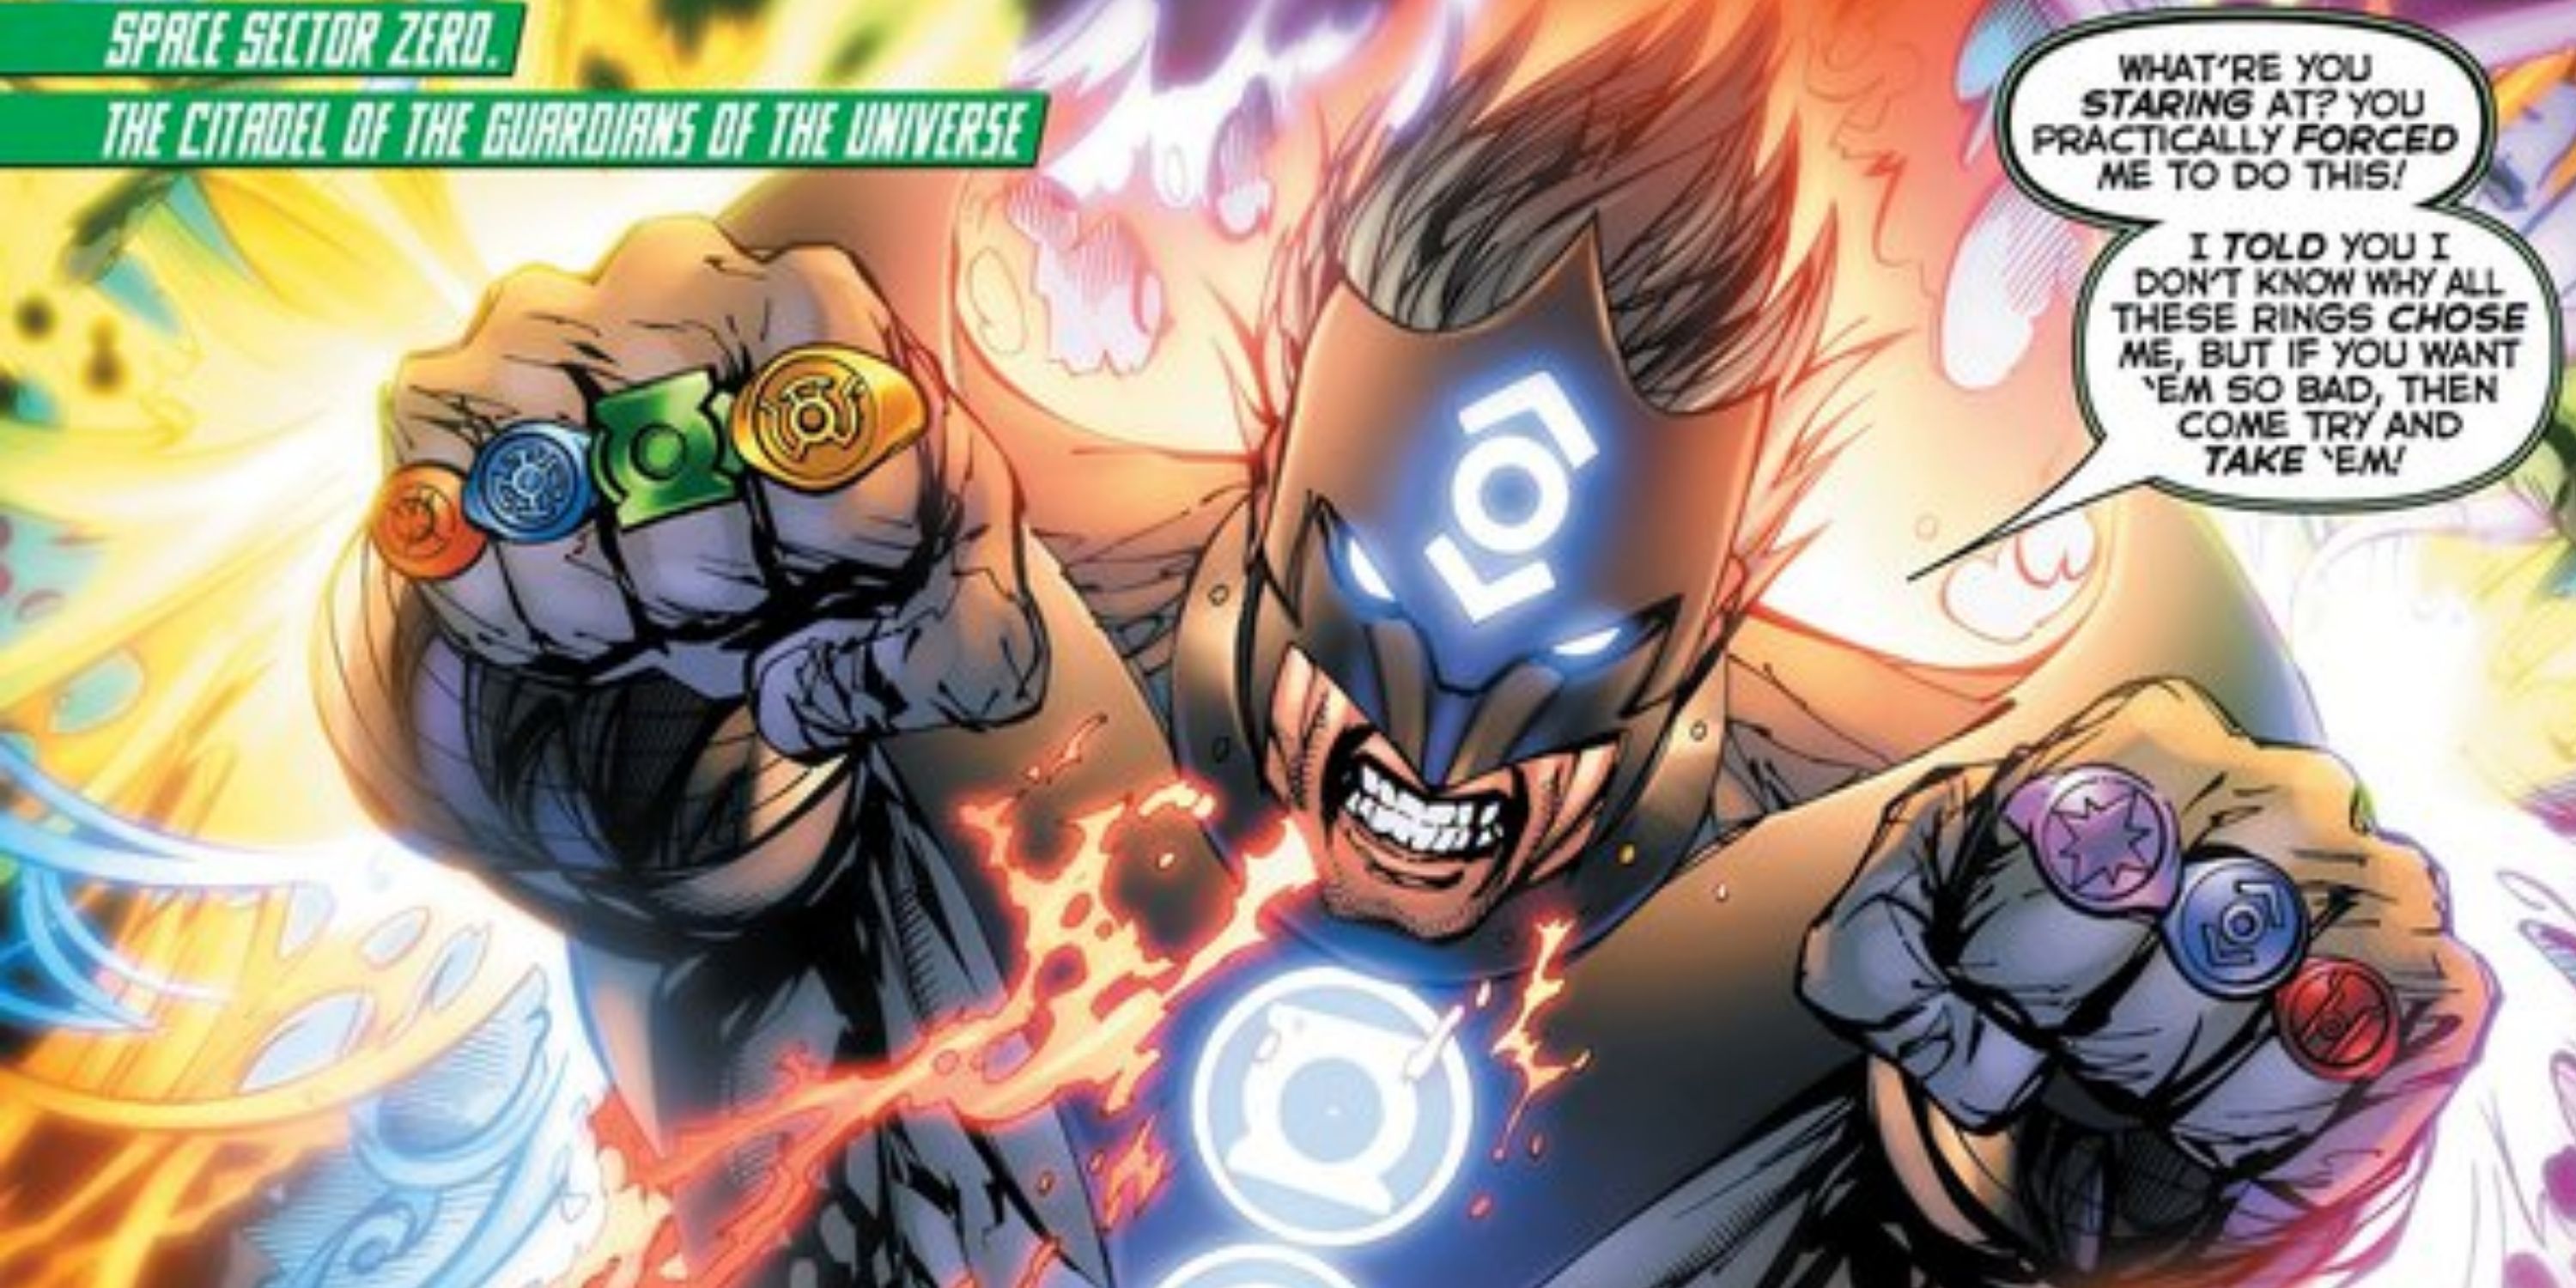 Kyle Rayner using the power of all the power rings